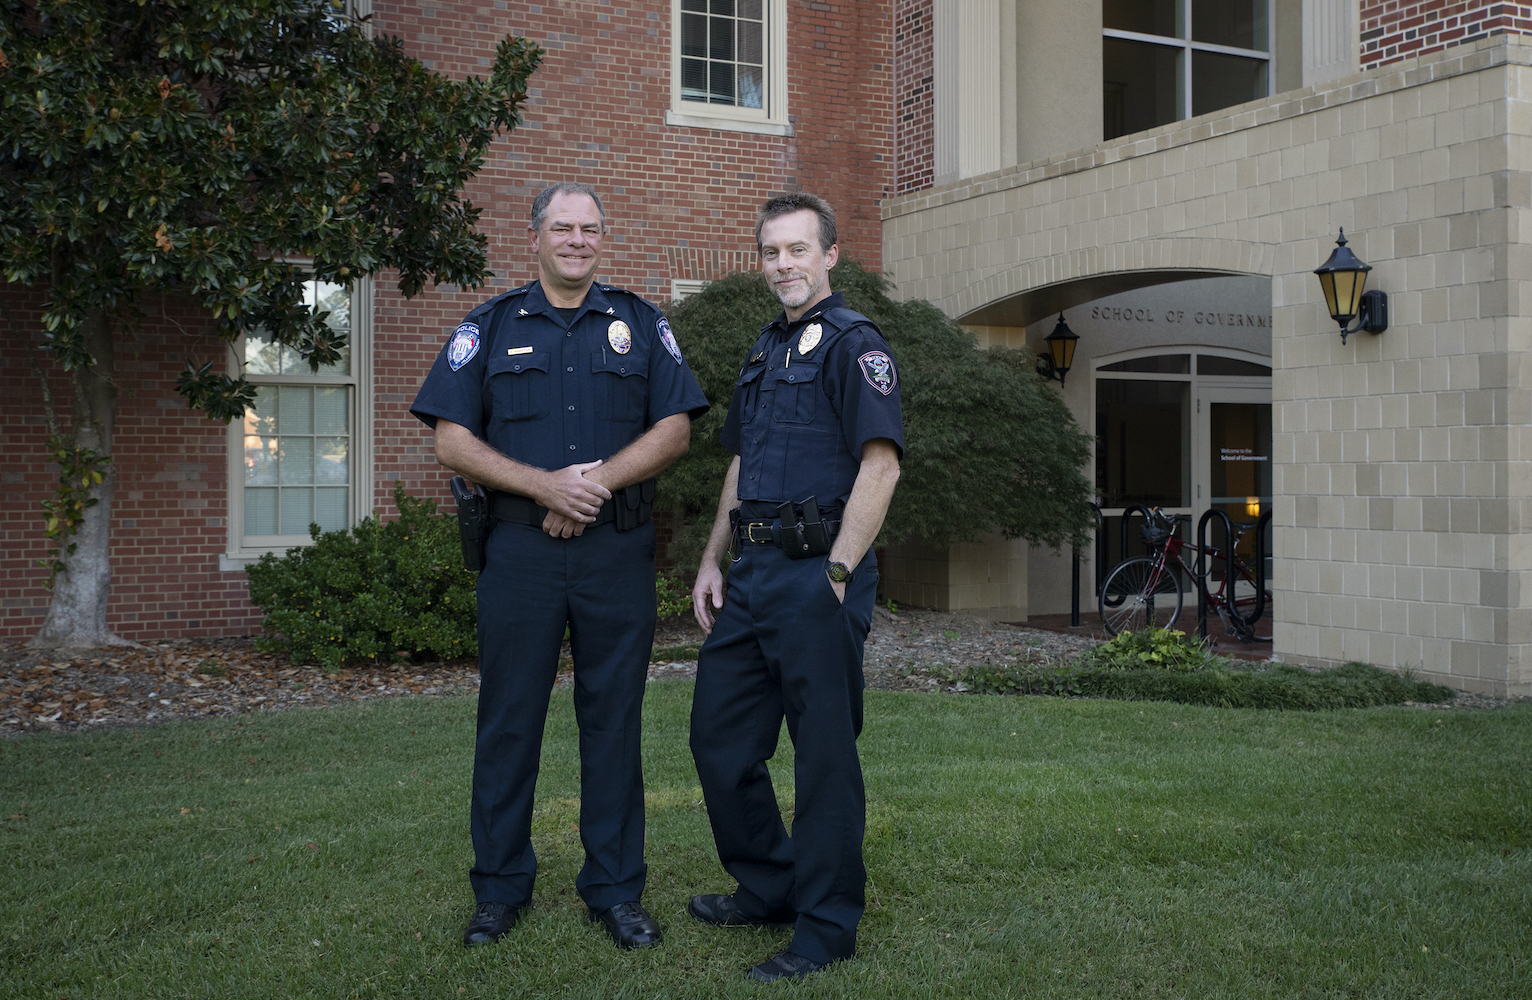 Chris Atack and Duane Hampton in police uniforms pose at the UNC School of Government.